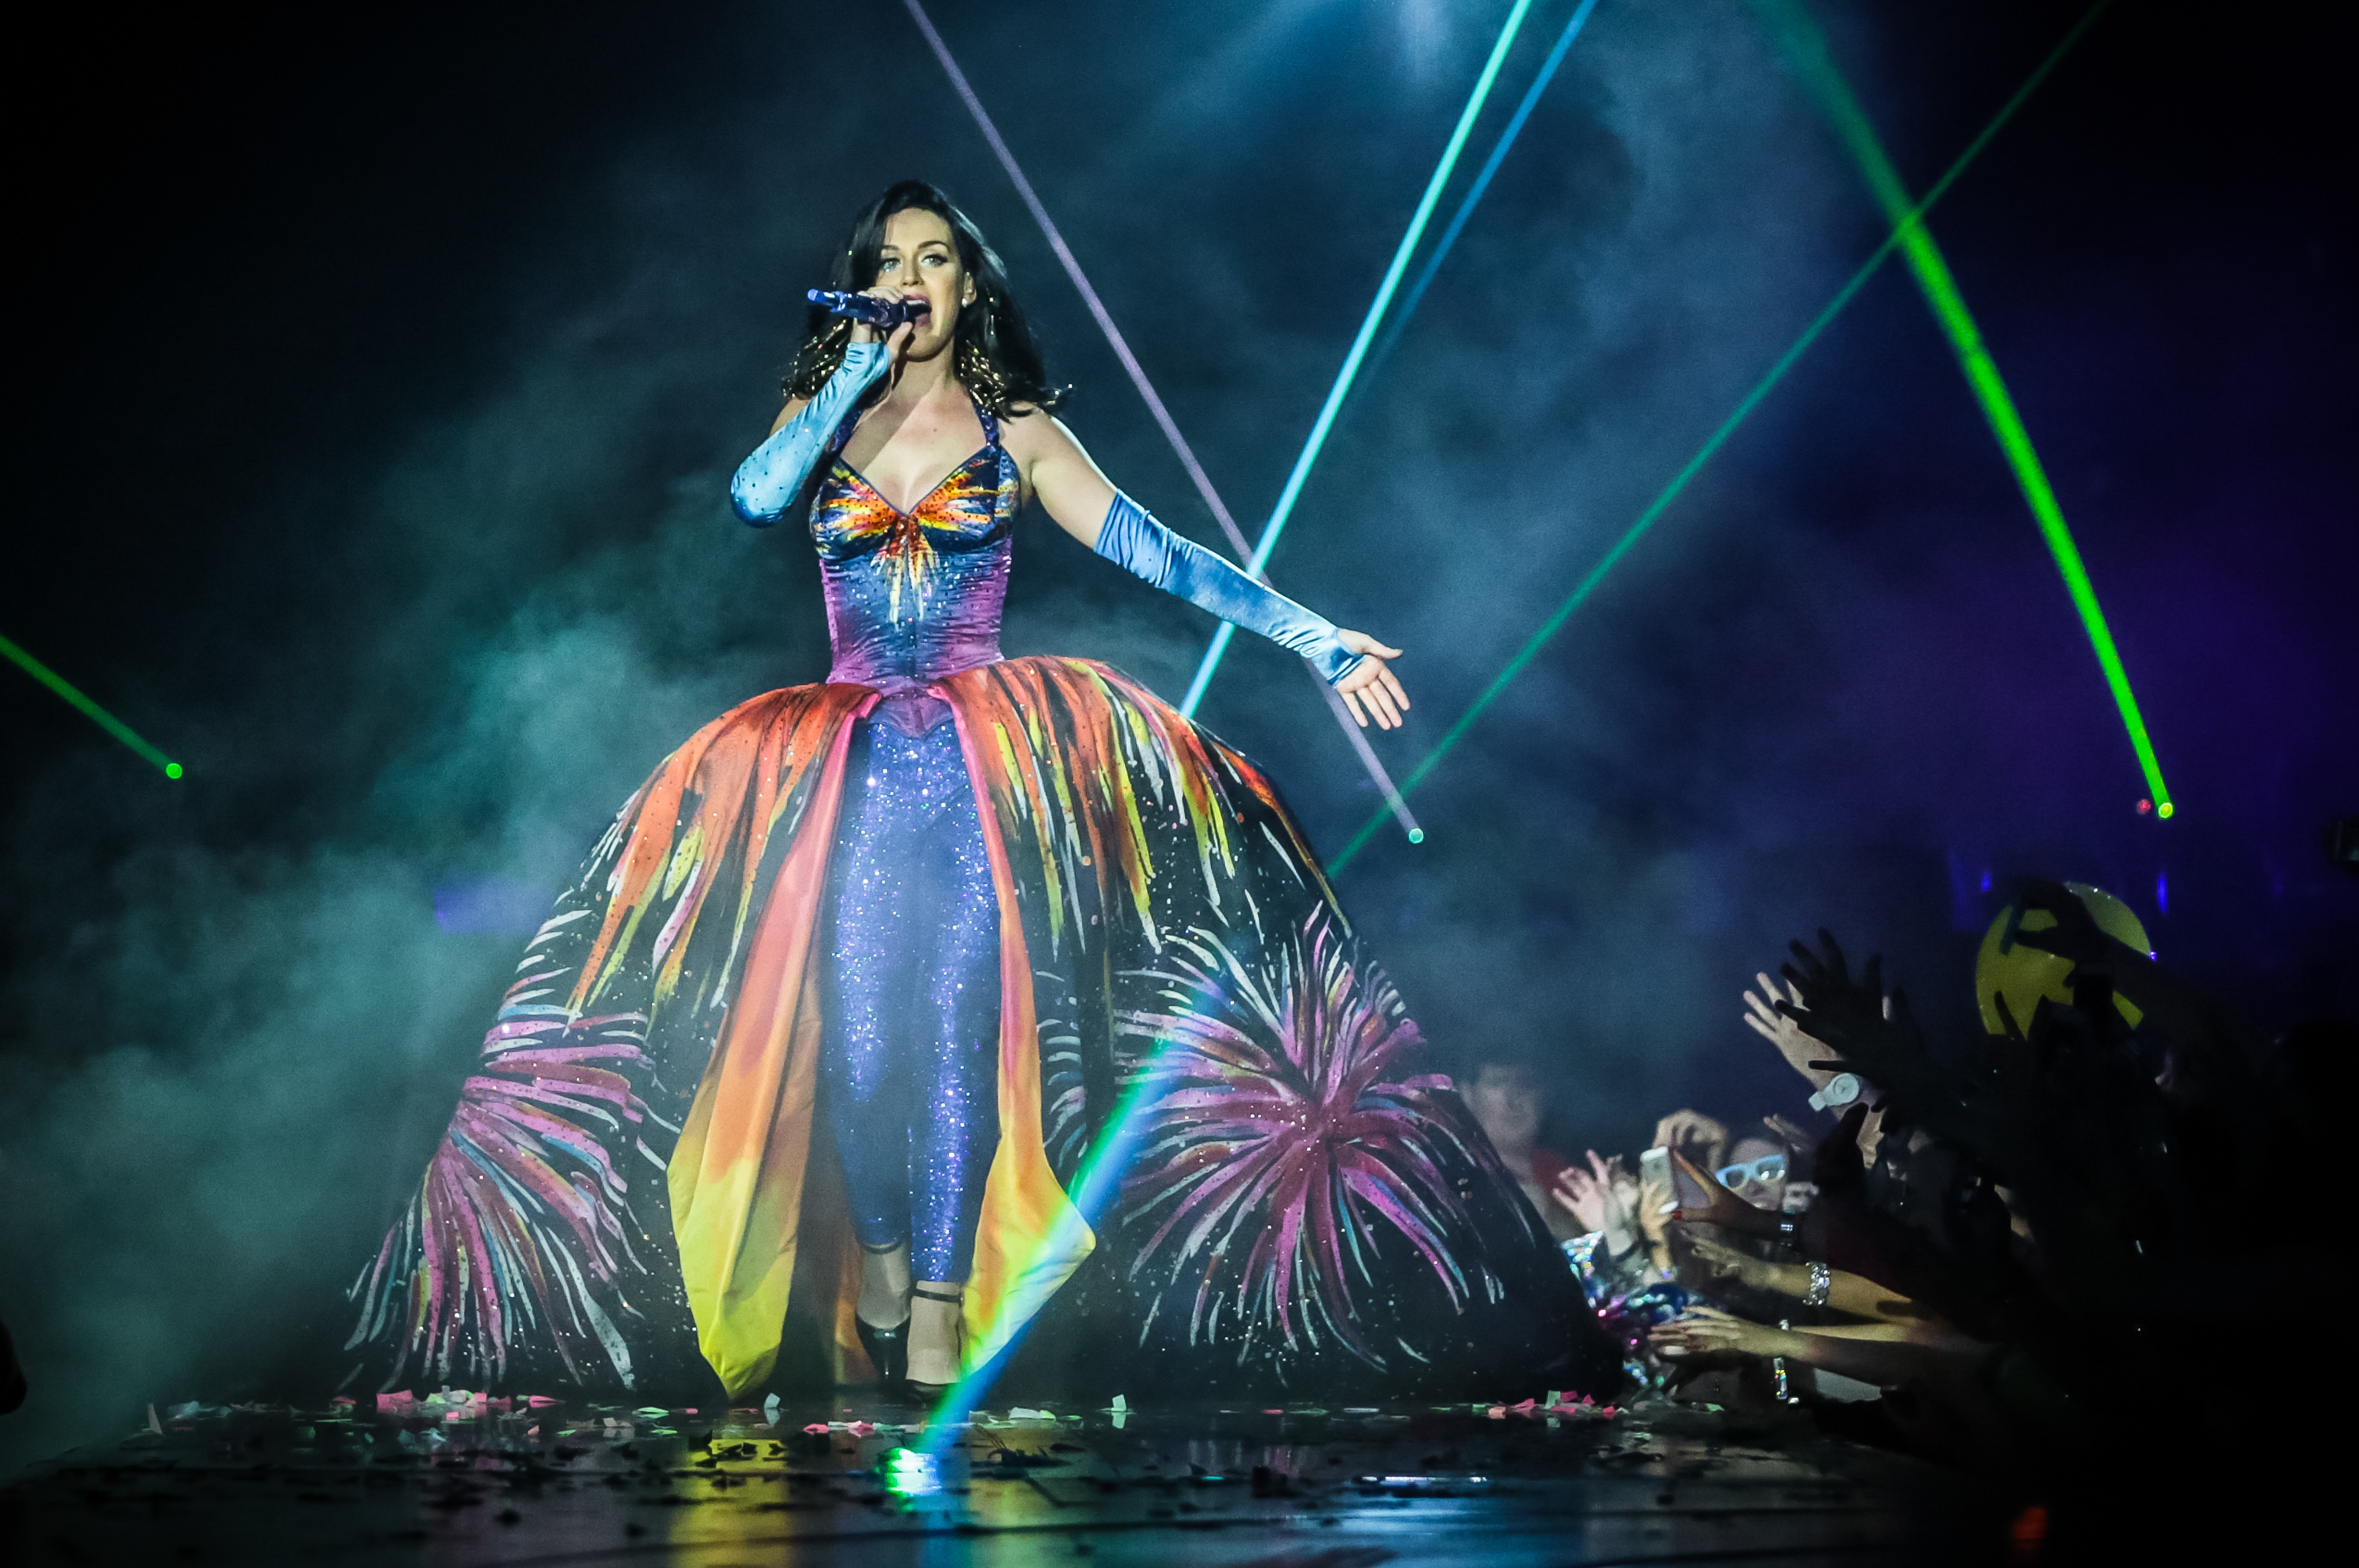 Katy Perry performs on stage on the second night of her Prismatic World Tour at Odyssey Arena on May 8, 2014 in Belfast, Northern Ireland. (Christie Goodwin—Getty Images)